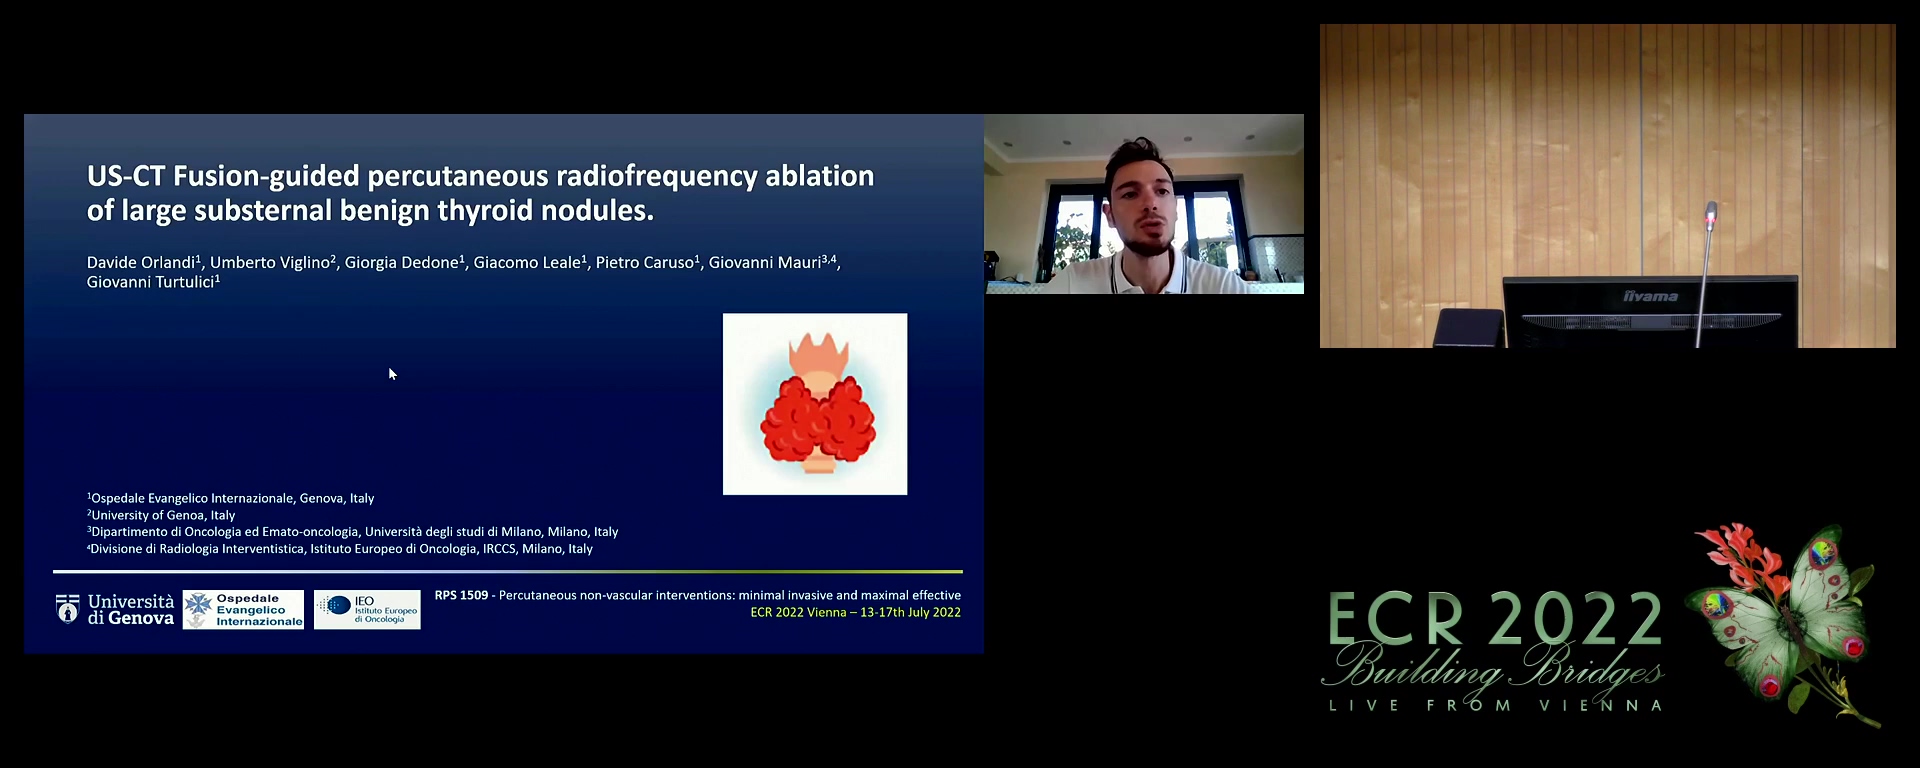 US-CT fusion-guided percutaneous radiofrequency ablation of large substernal benign thyroid nodules - Umberto Viglino, Genoa / IT